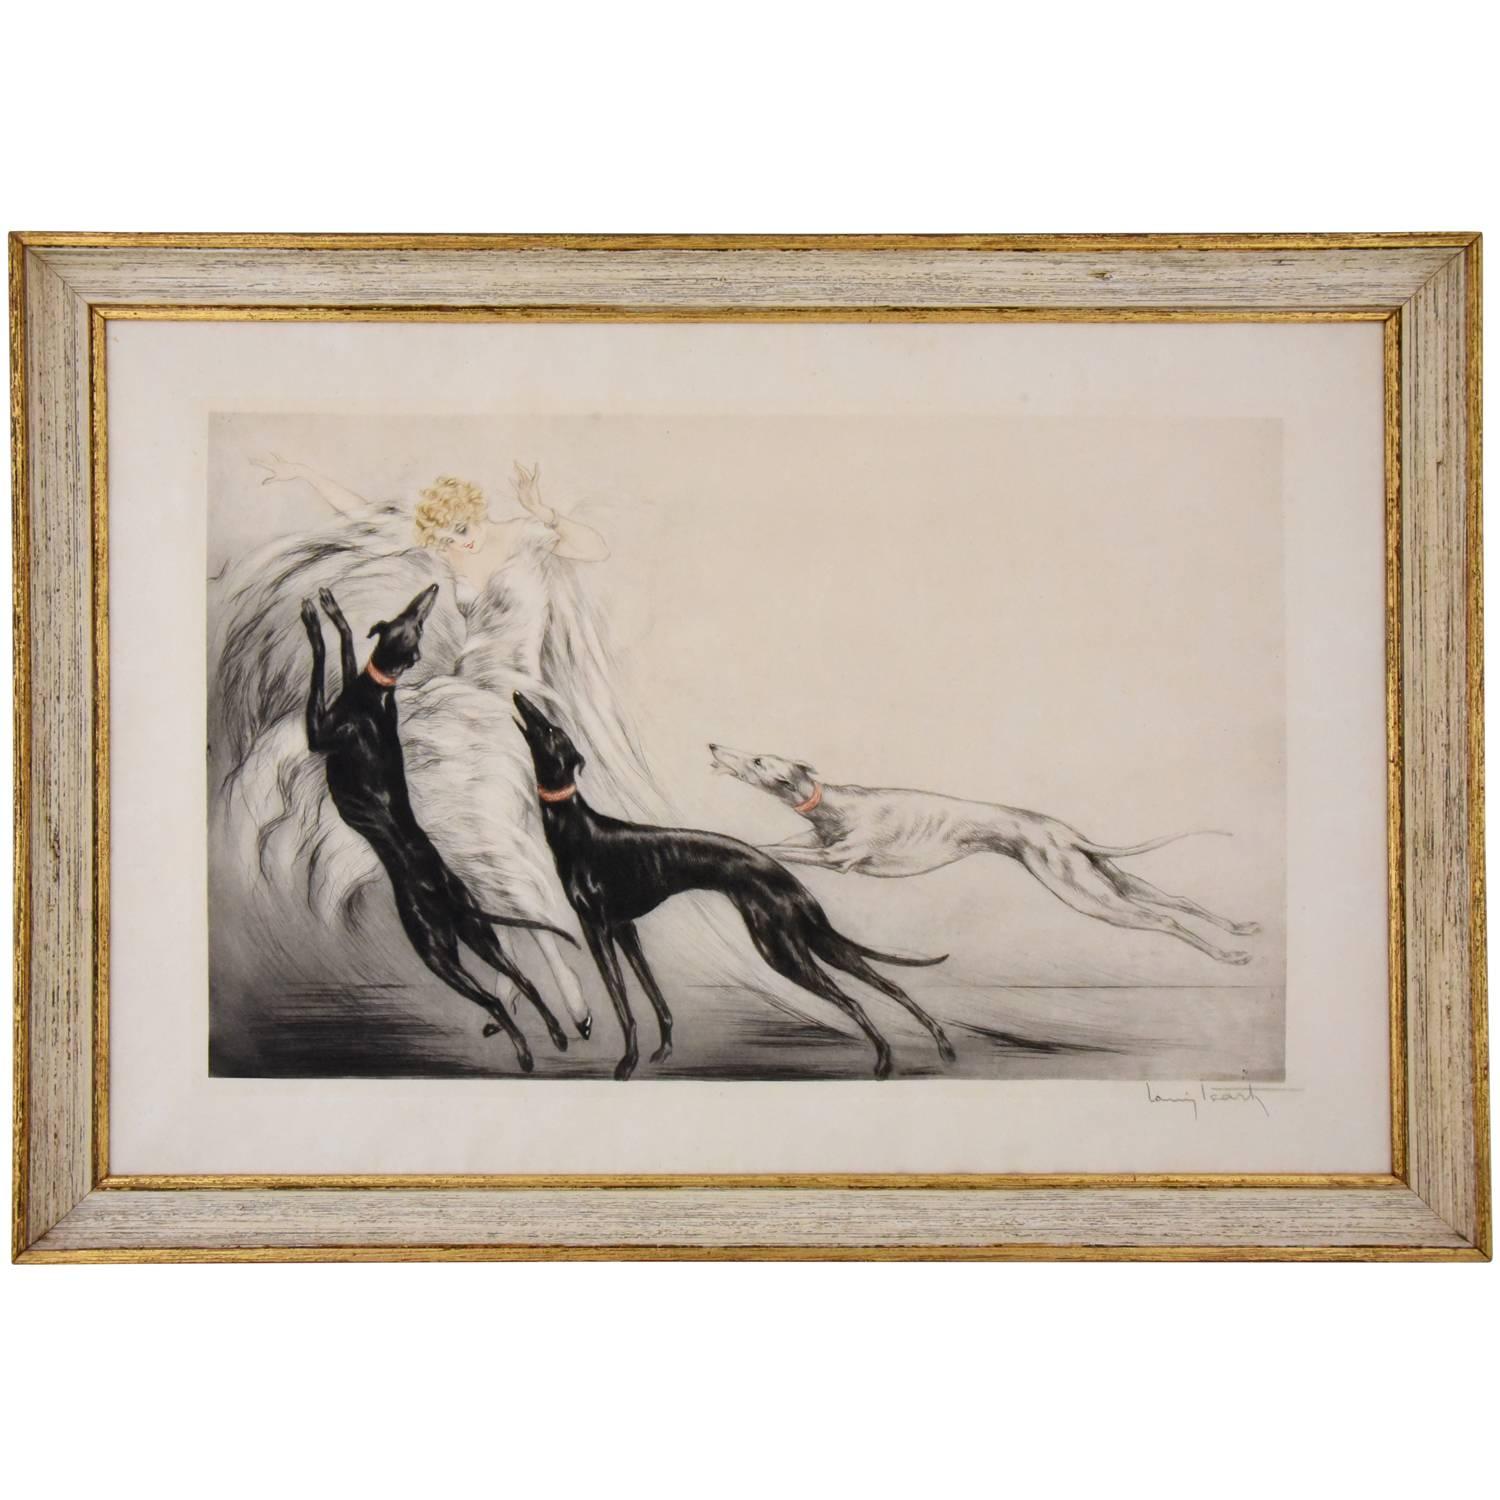 Coursing, Art Deco Etching Elegant Lady with Grey Hound Dogs by Louis Icart 1929